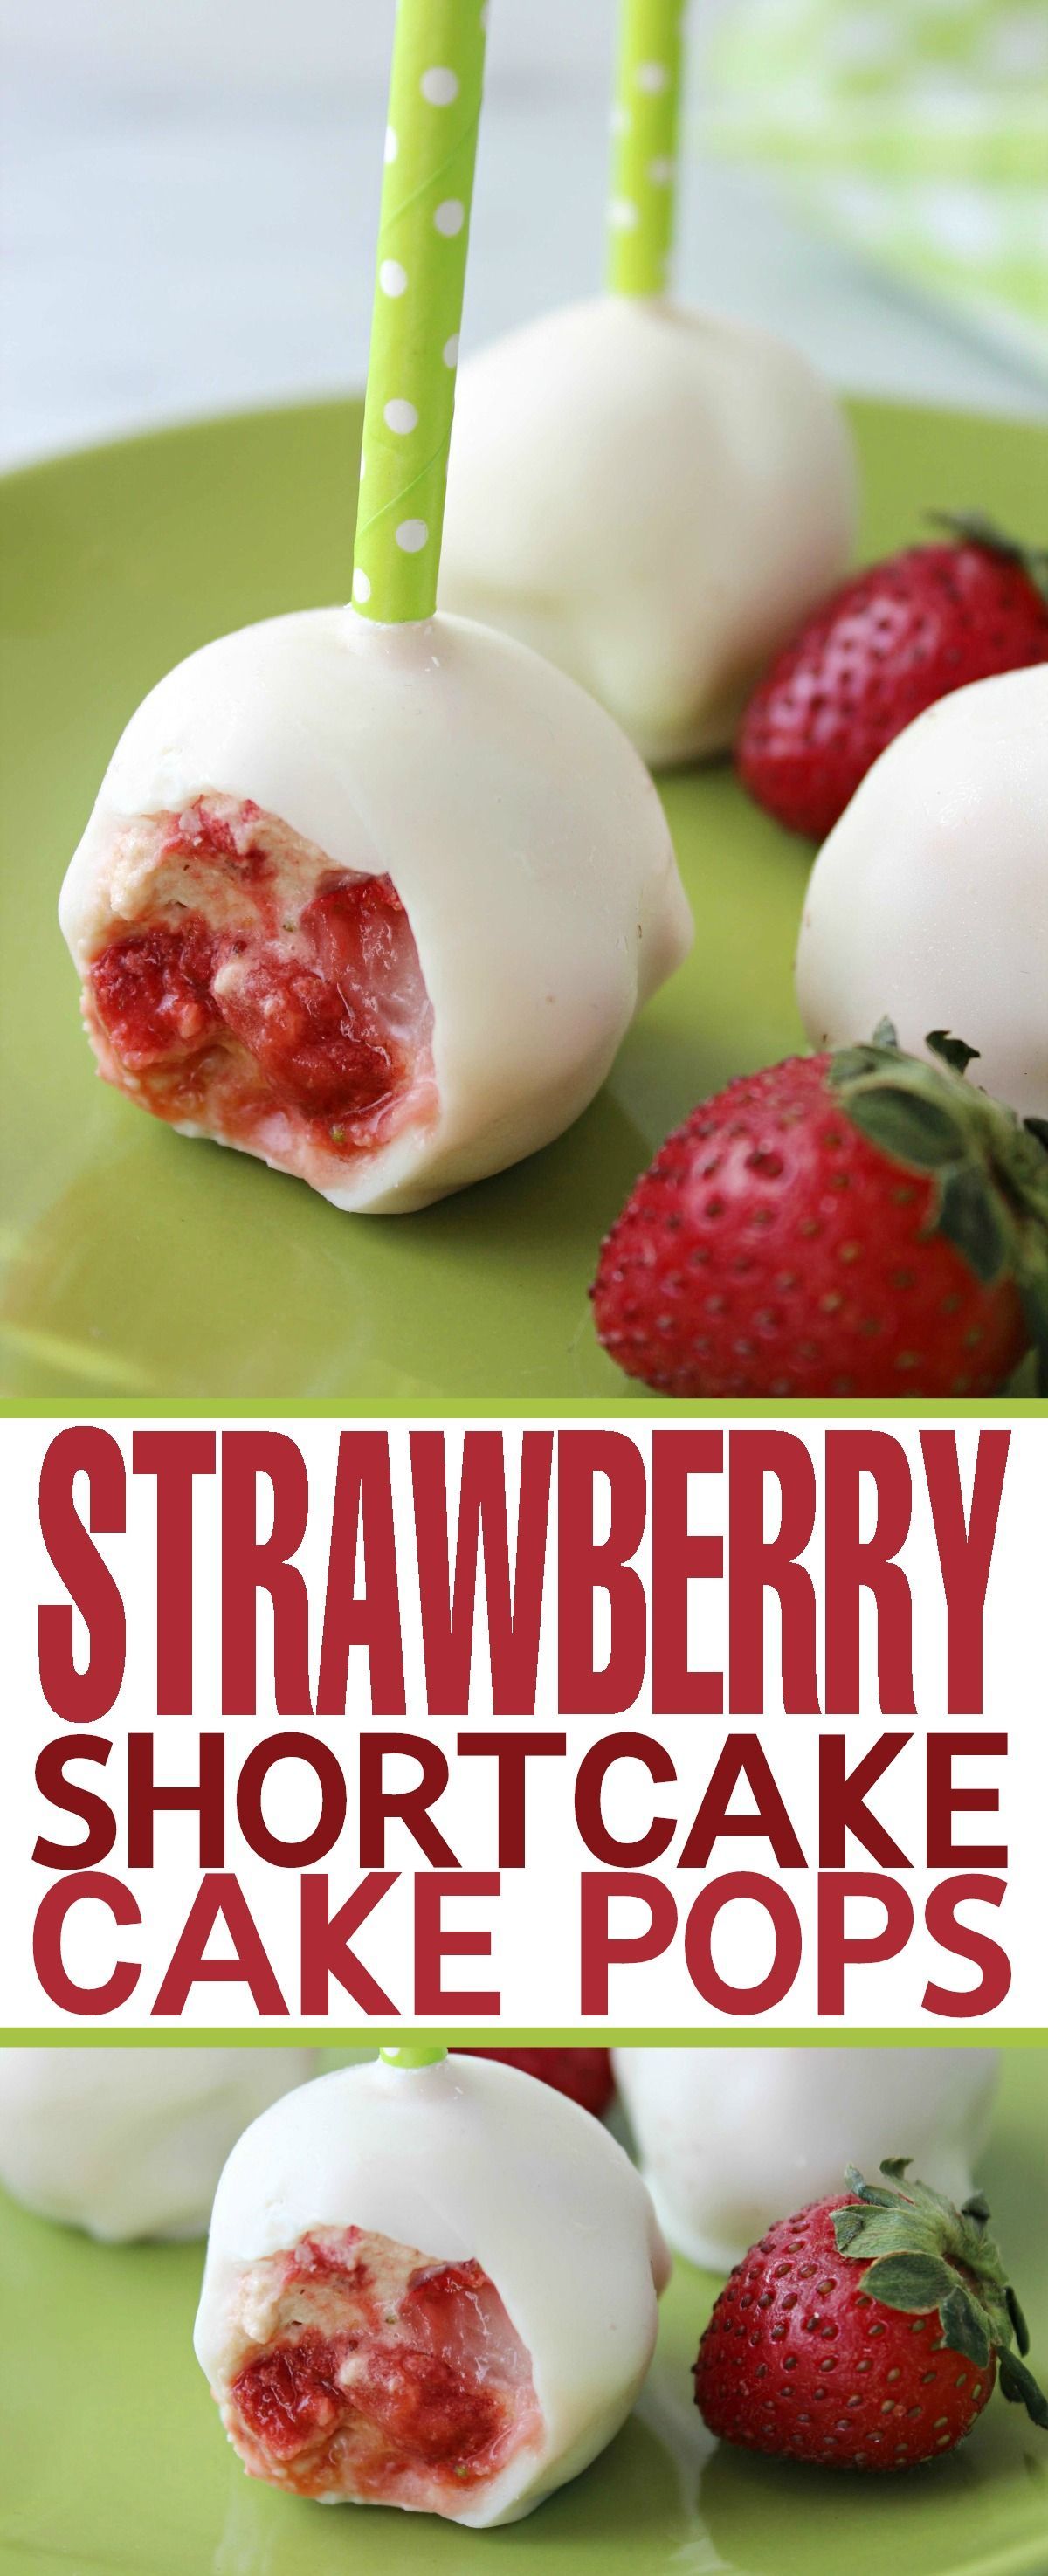 This Strawberry Shortcake Cake Pops Recipe results in the most amazing summery cake pops you have ever eaten.  Perfect for a